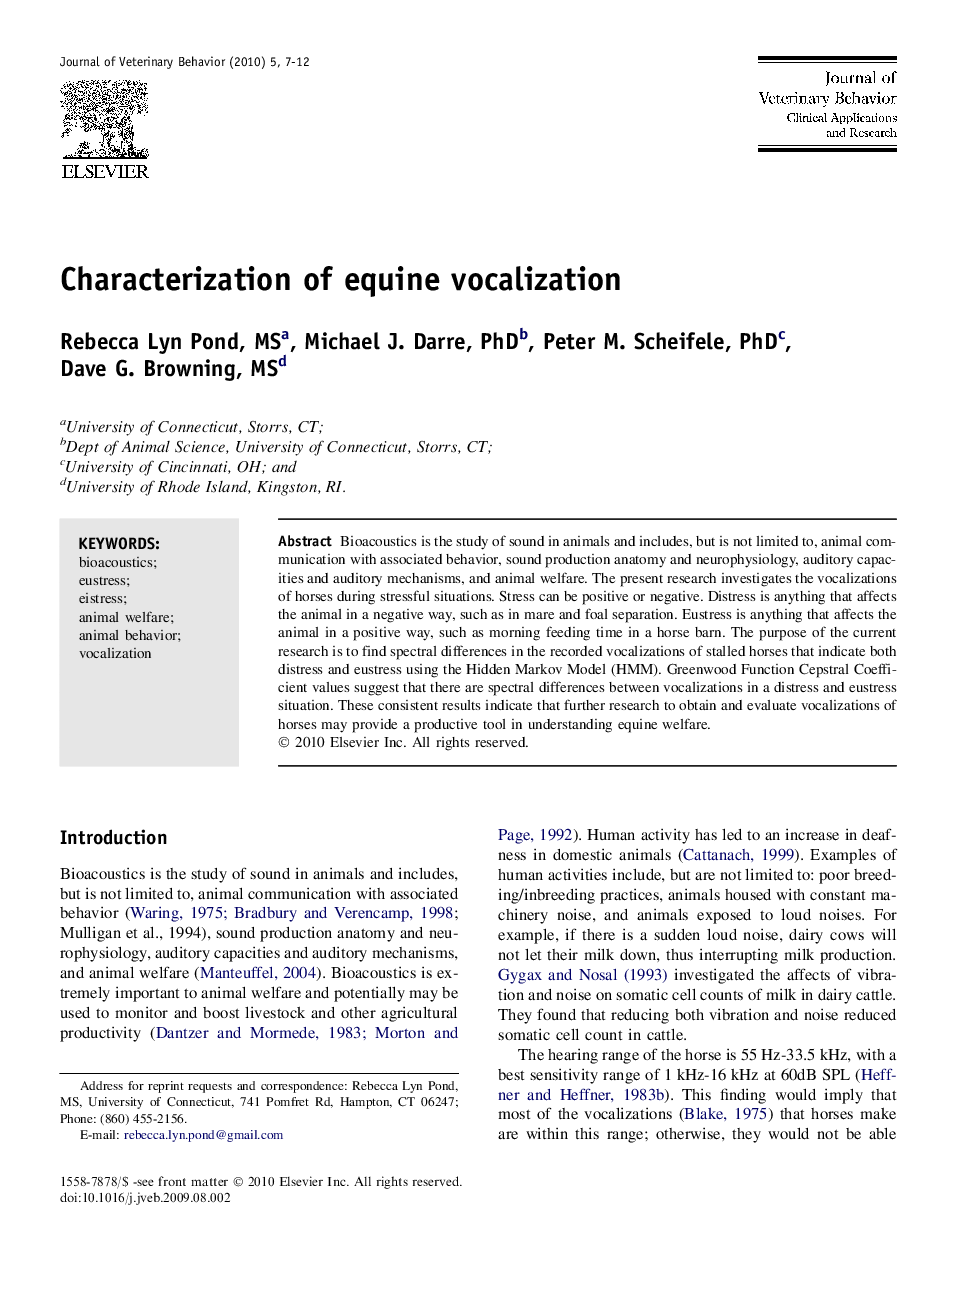 Characterization of equine vocalization